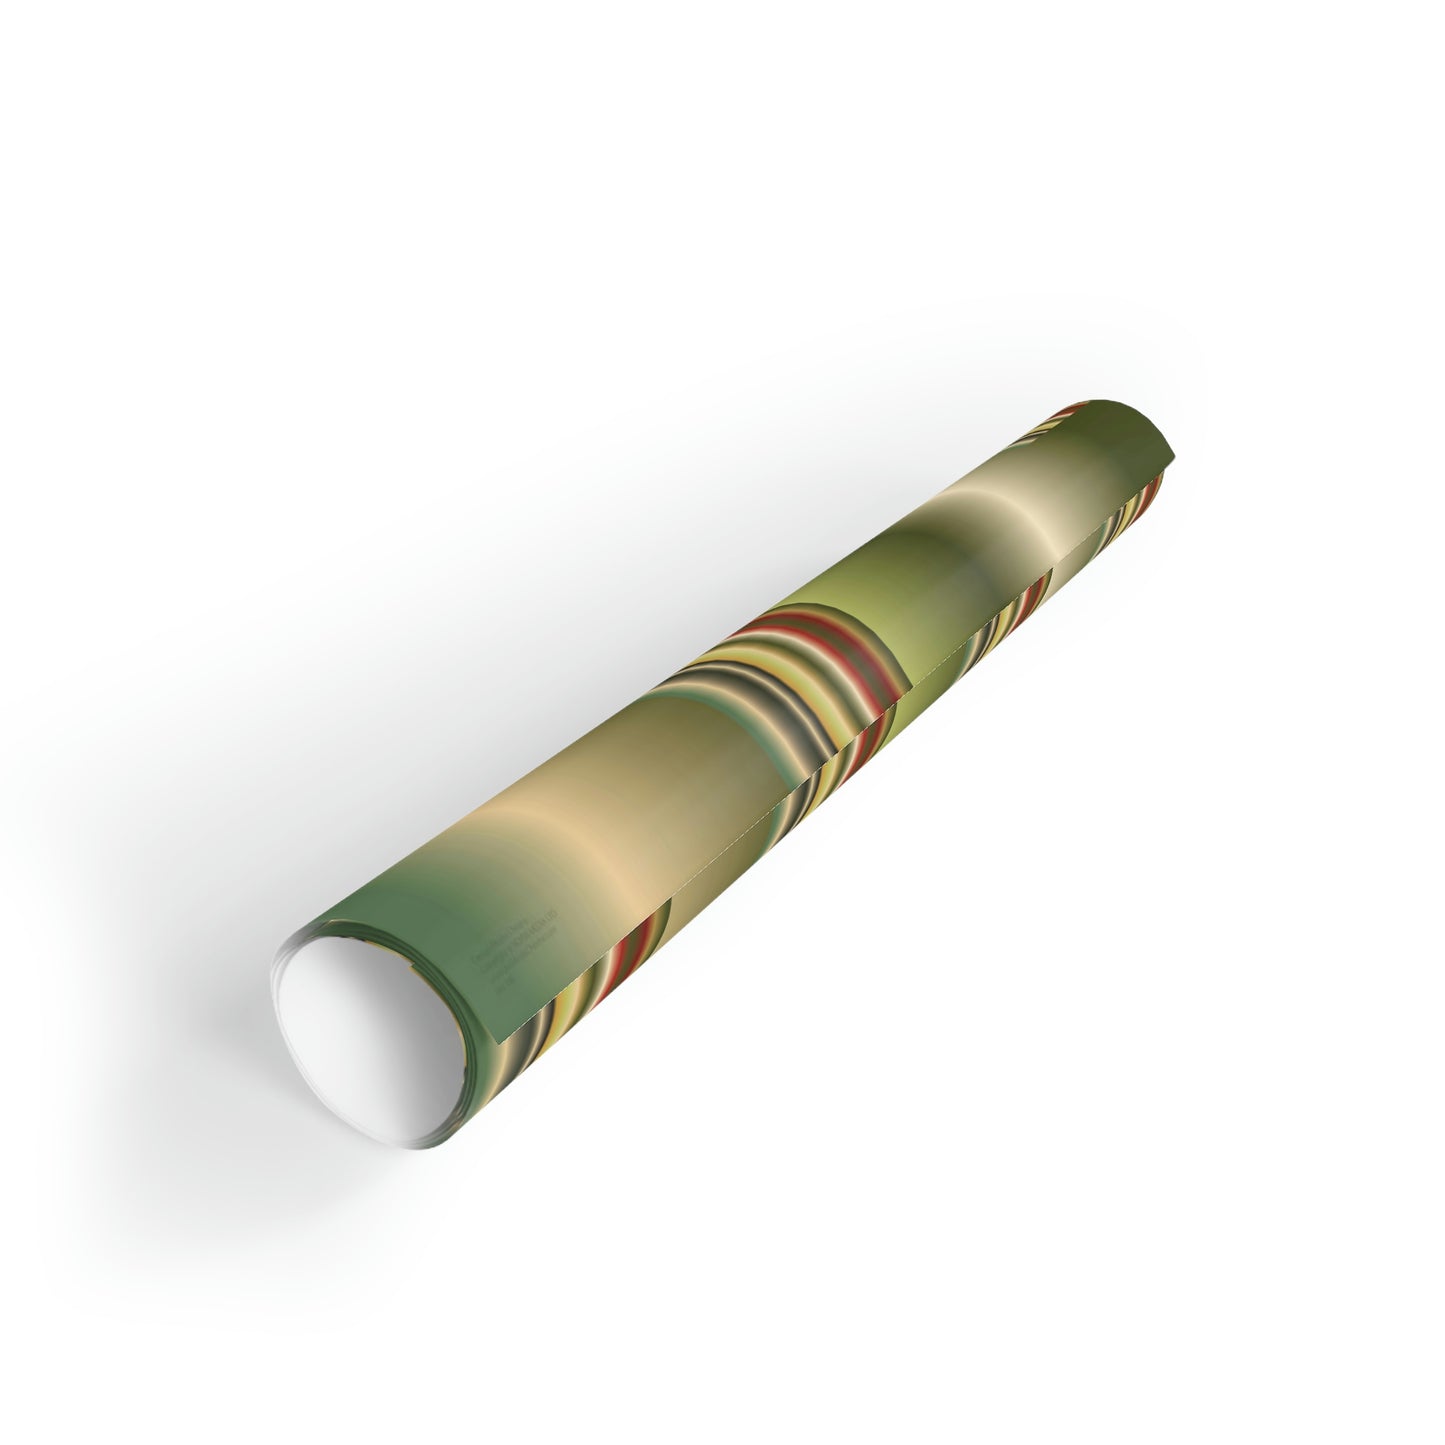 Gift Wrapping Paper Rolls - 1pc, No.300